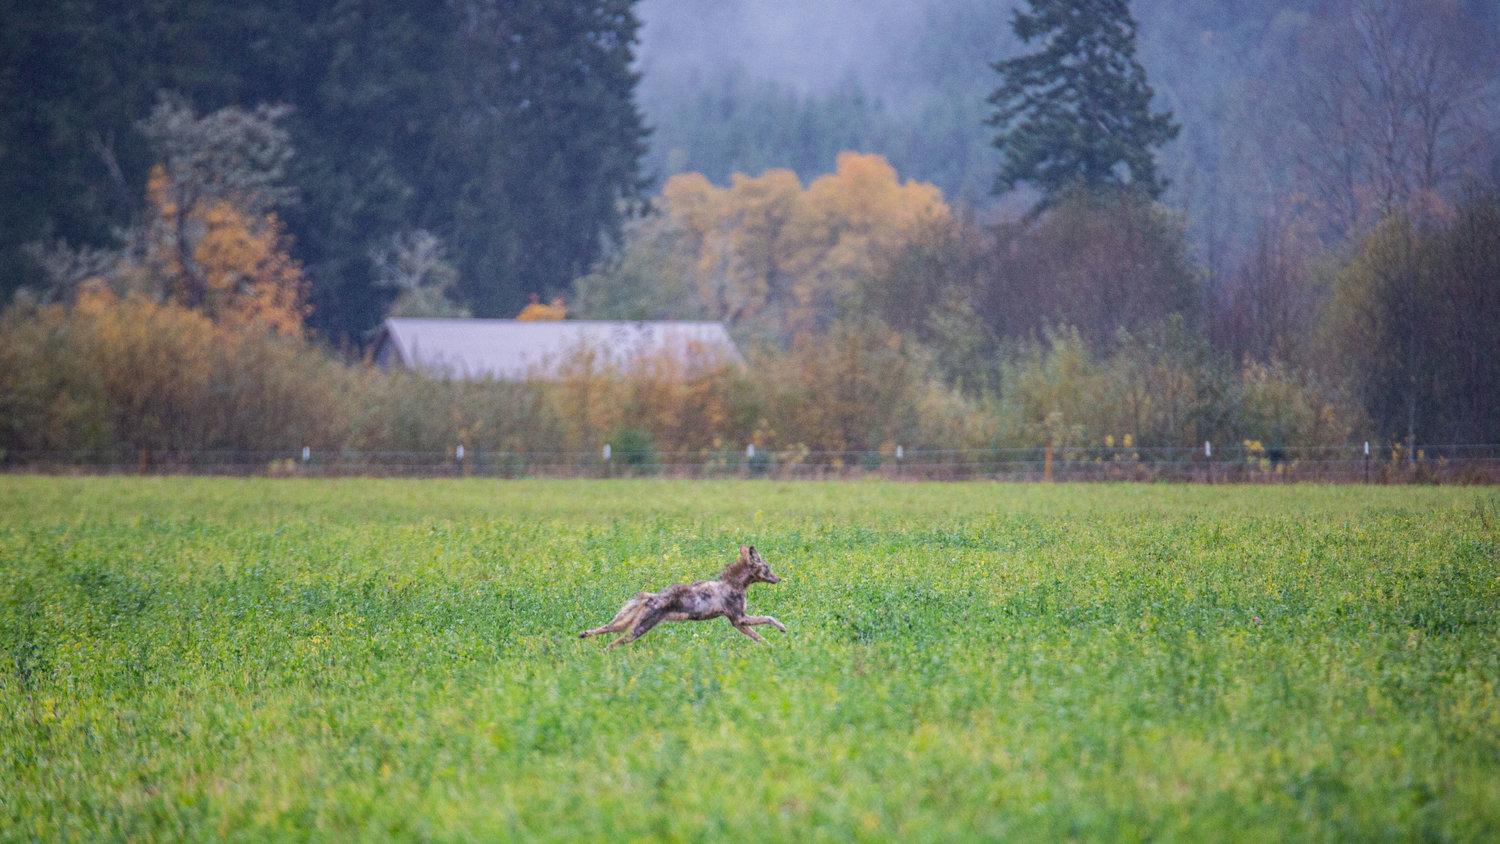 A mangy coyote sprints through a field in the Boistfort Valley near Lost Valley Road on Saturday morning.